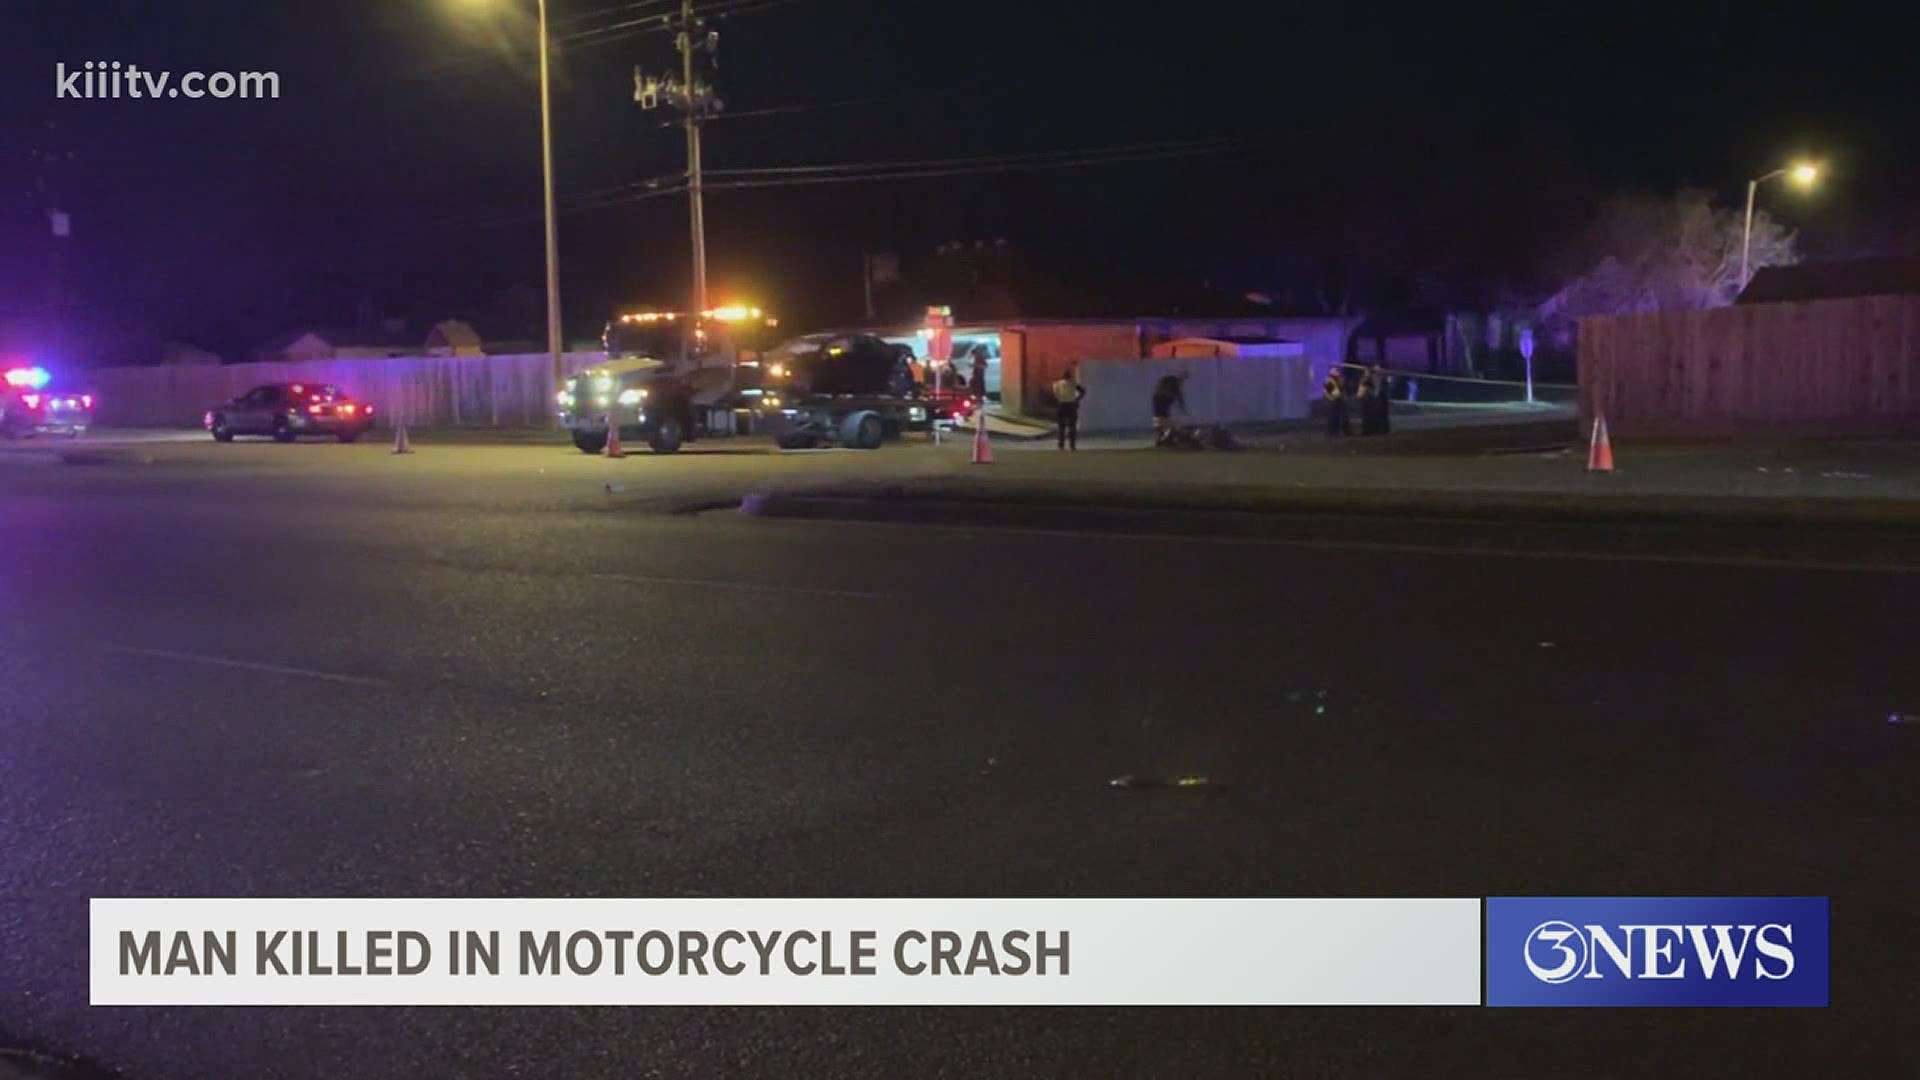 Police said the motorcycle was traveling at a high rate of speed and struck a truck that was turning.